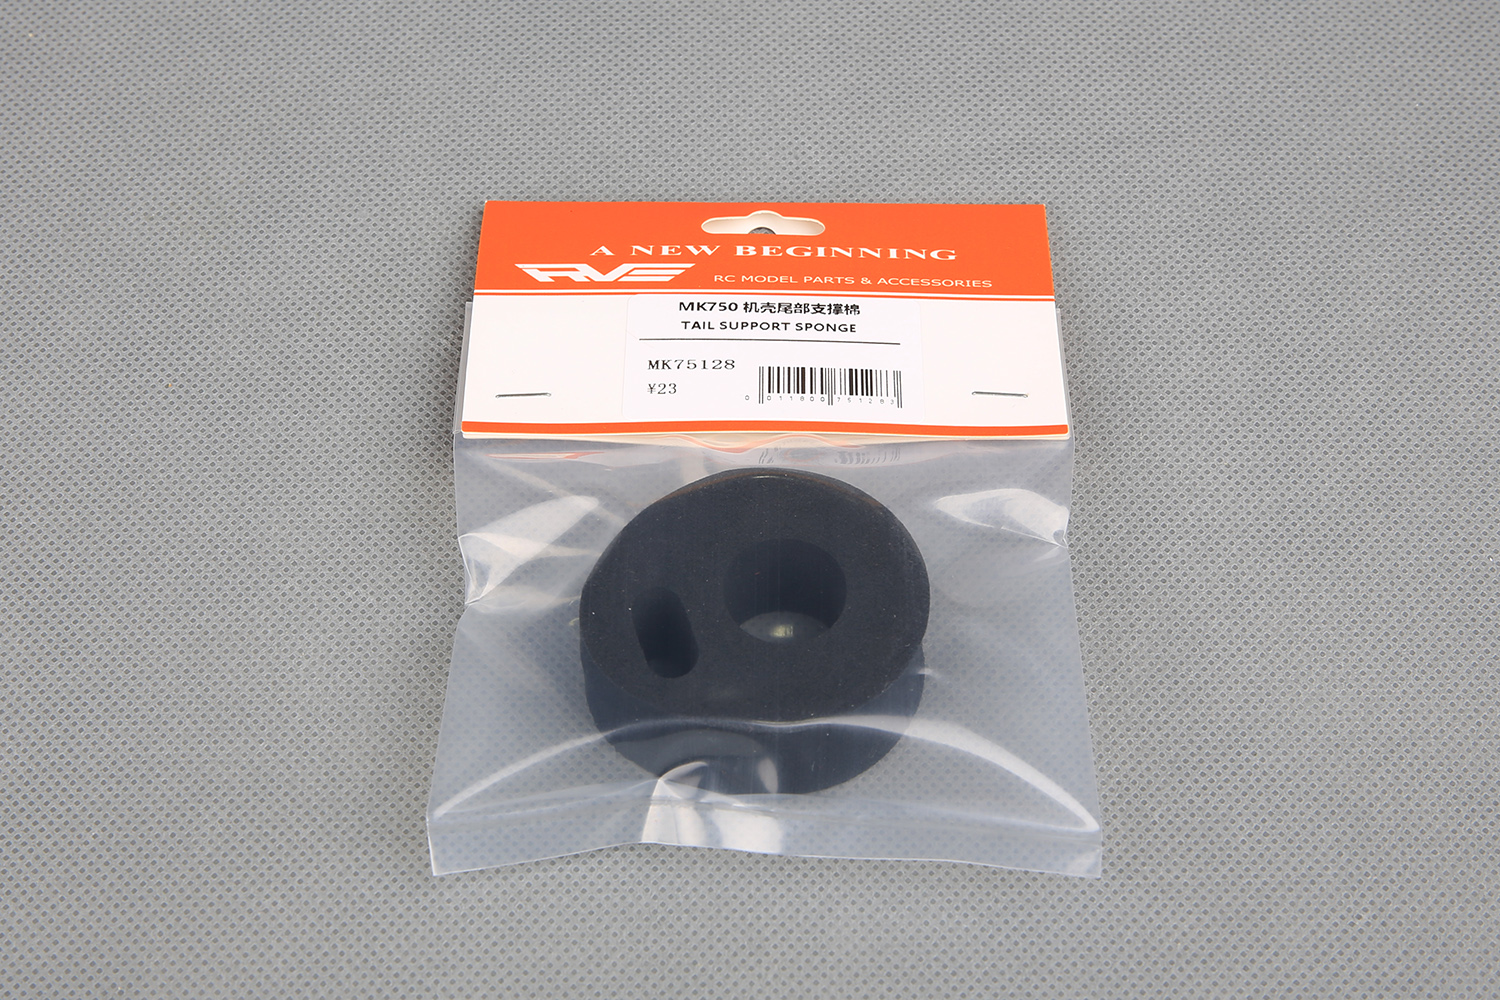 TAIL SUPPORT SPONGE(图1)